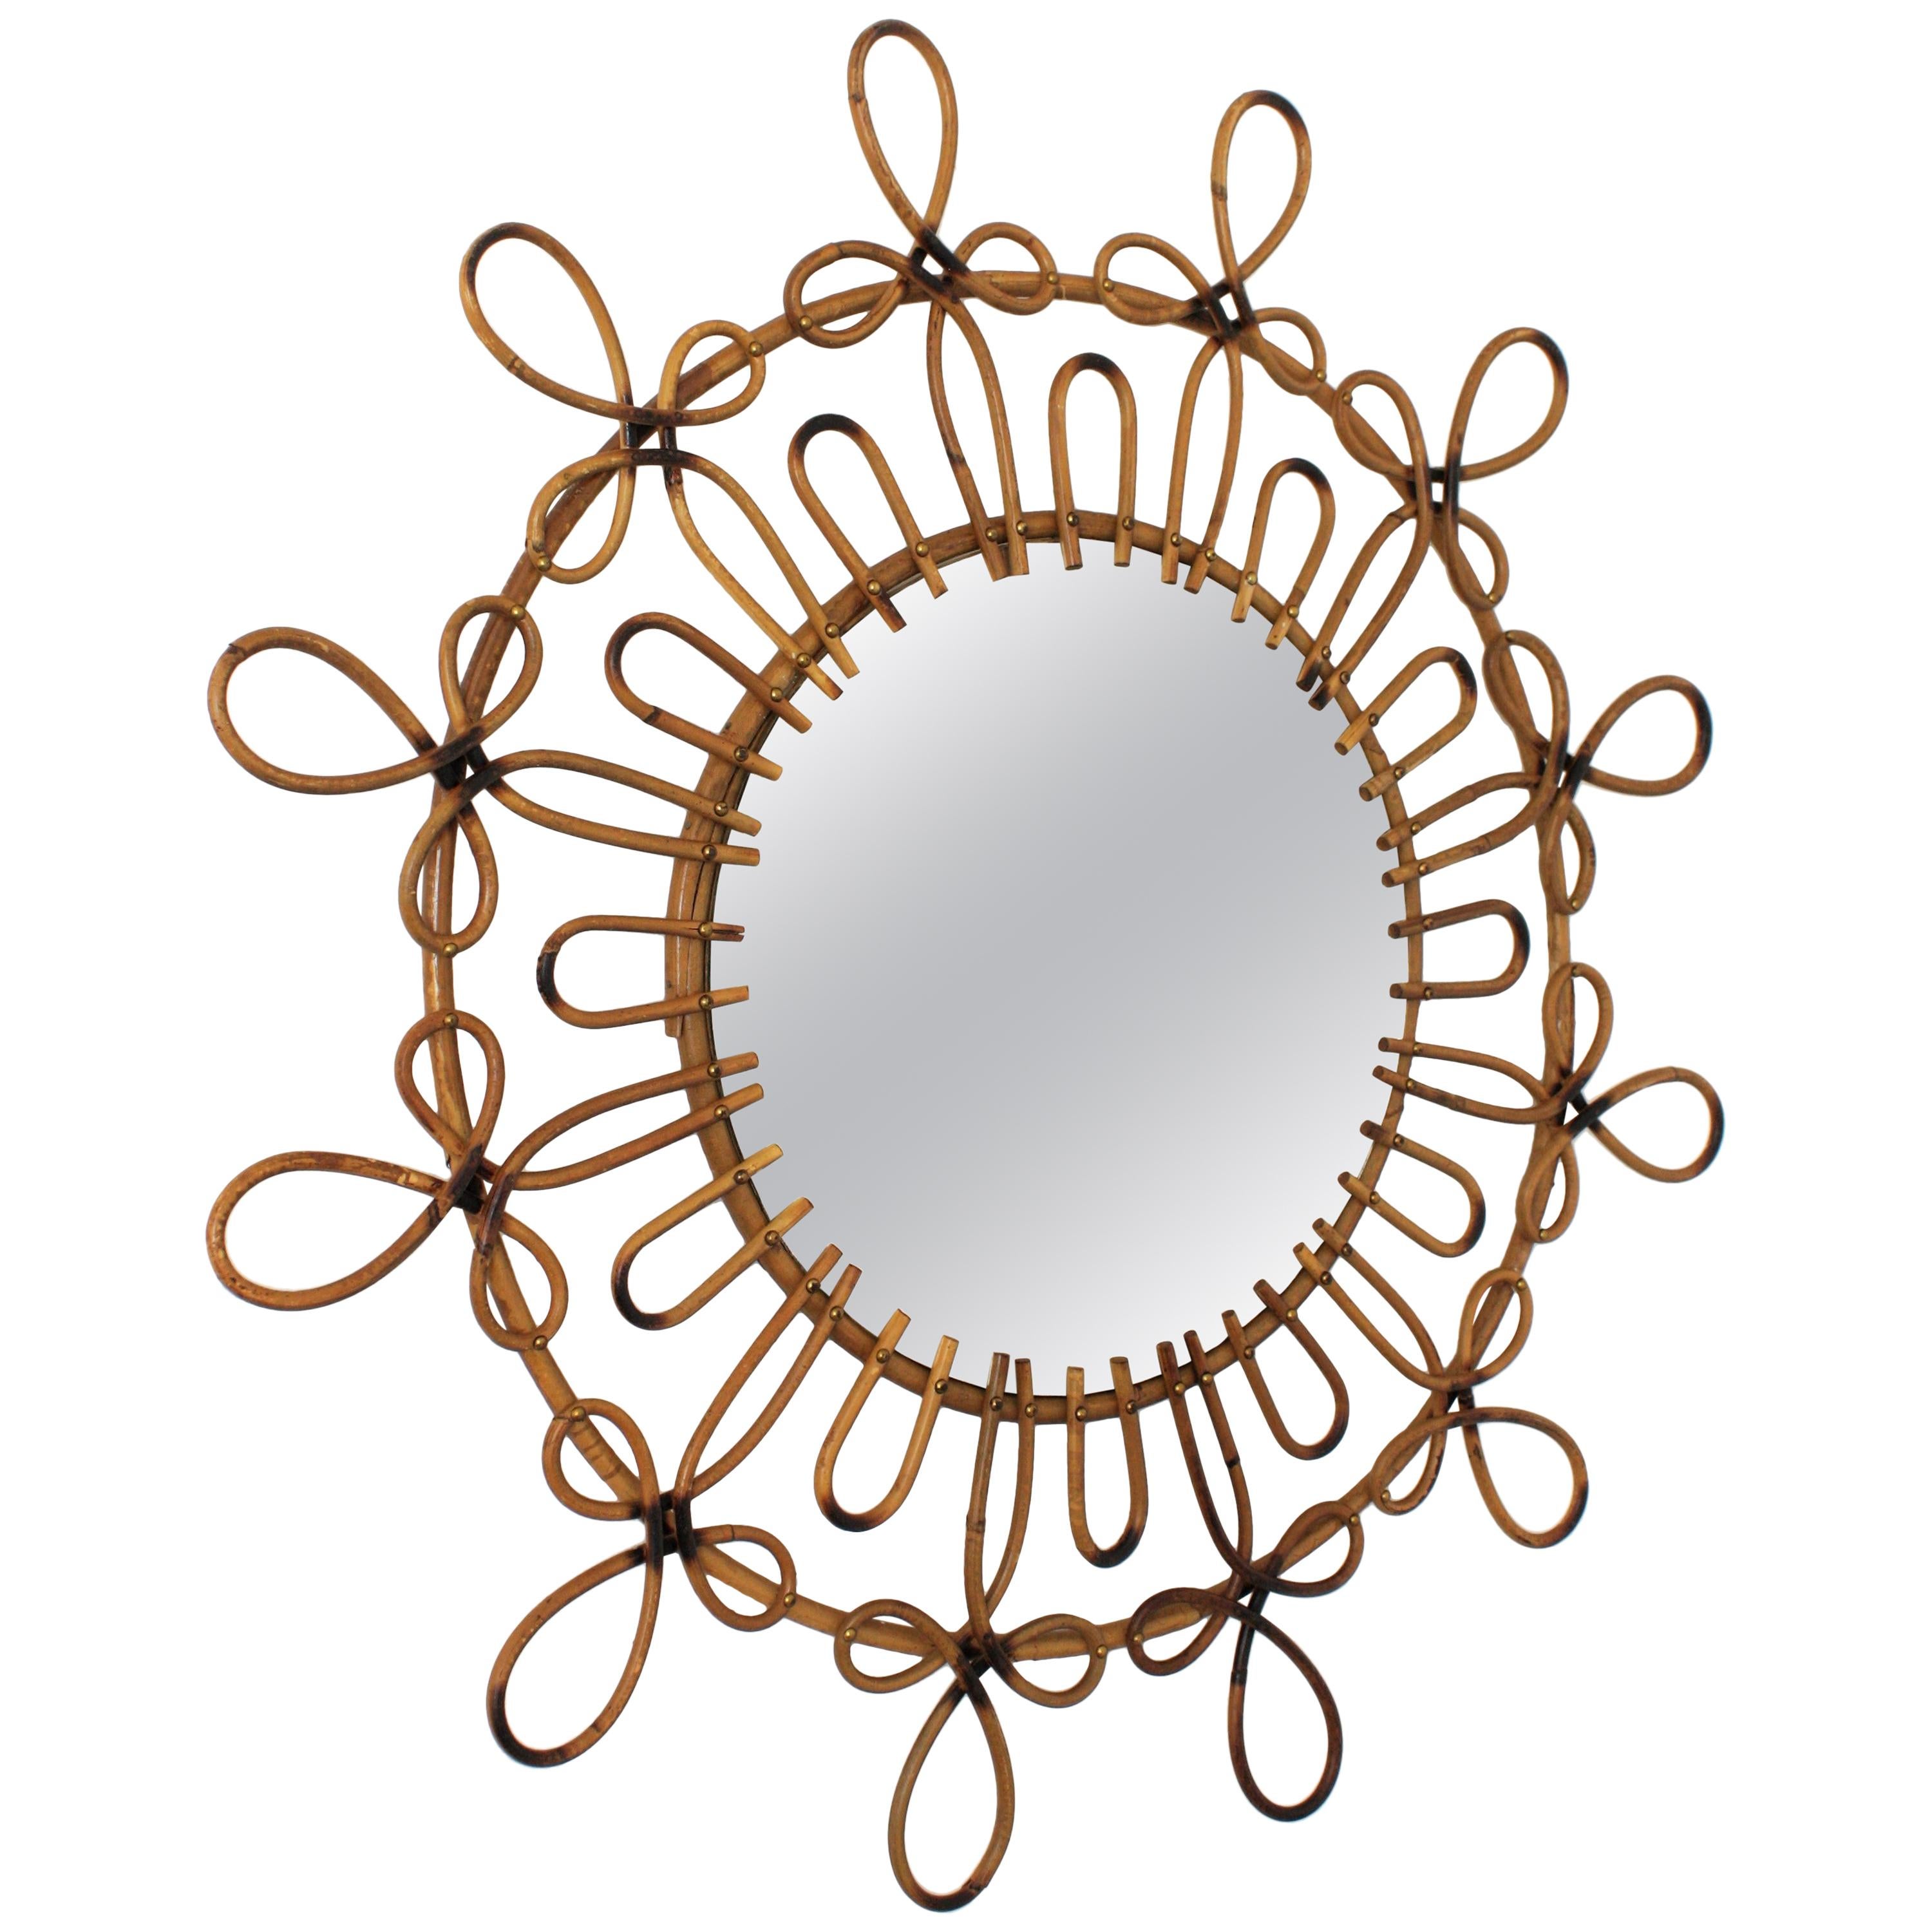 Spanish Rattan and Wicker Flower Burst Mirror with Loops and Pyrography Details